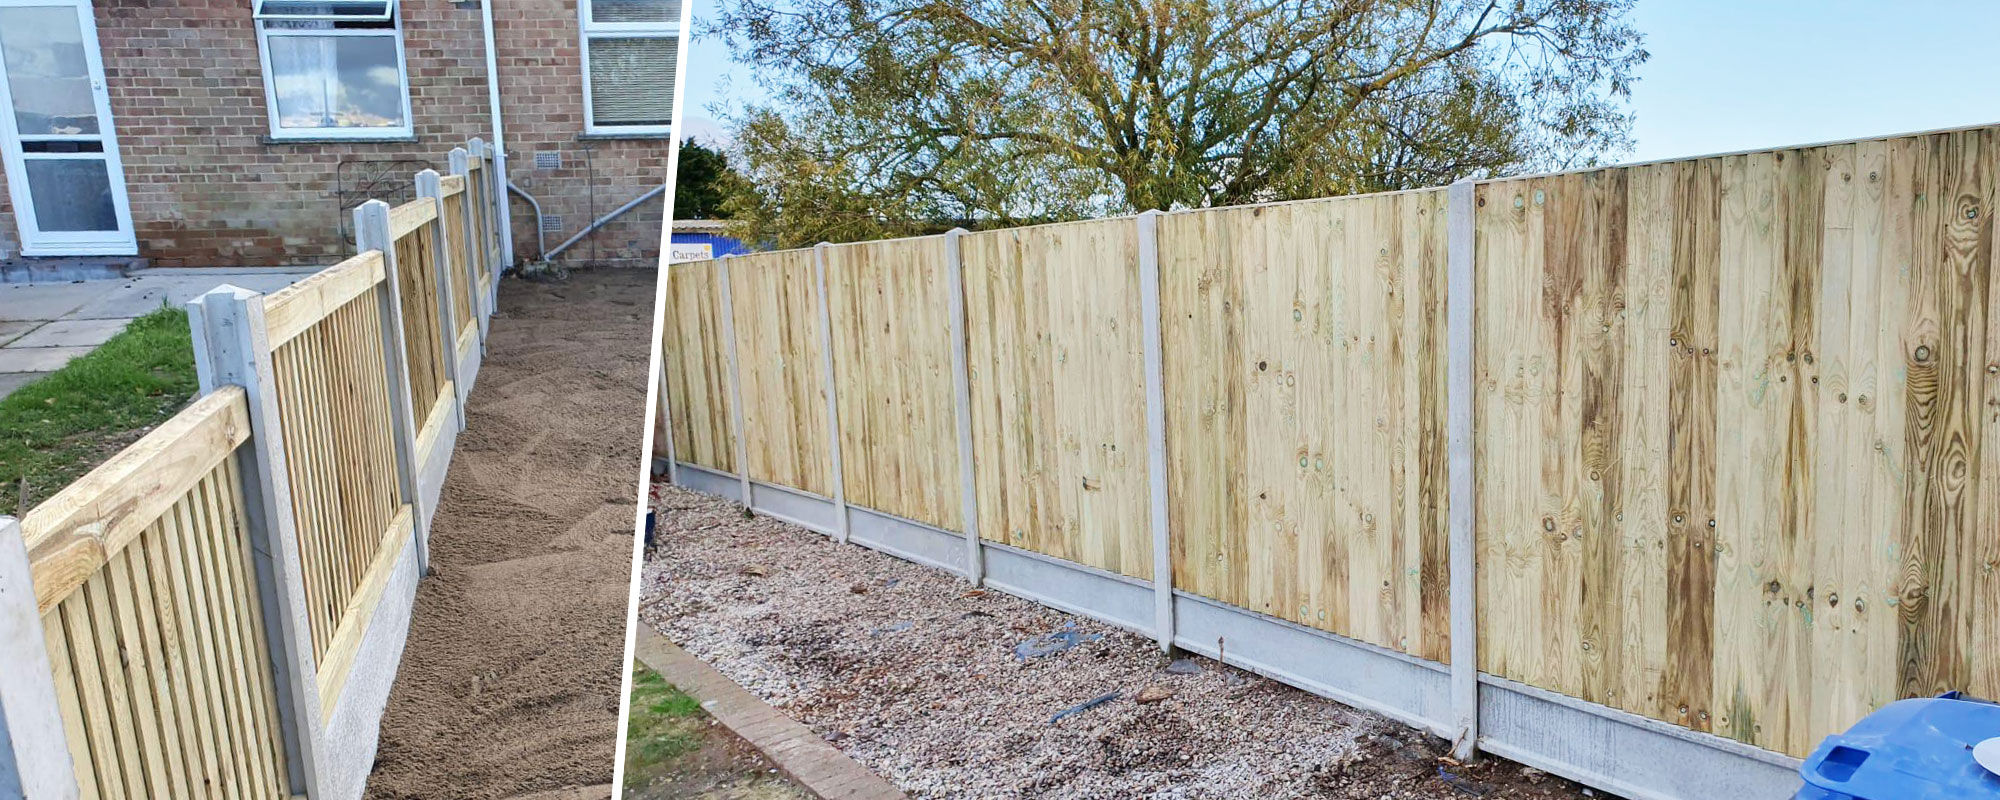 Fencing Services - Fencing which looks great and lasts for many years